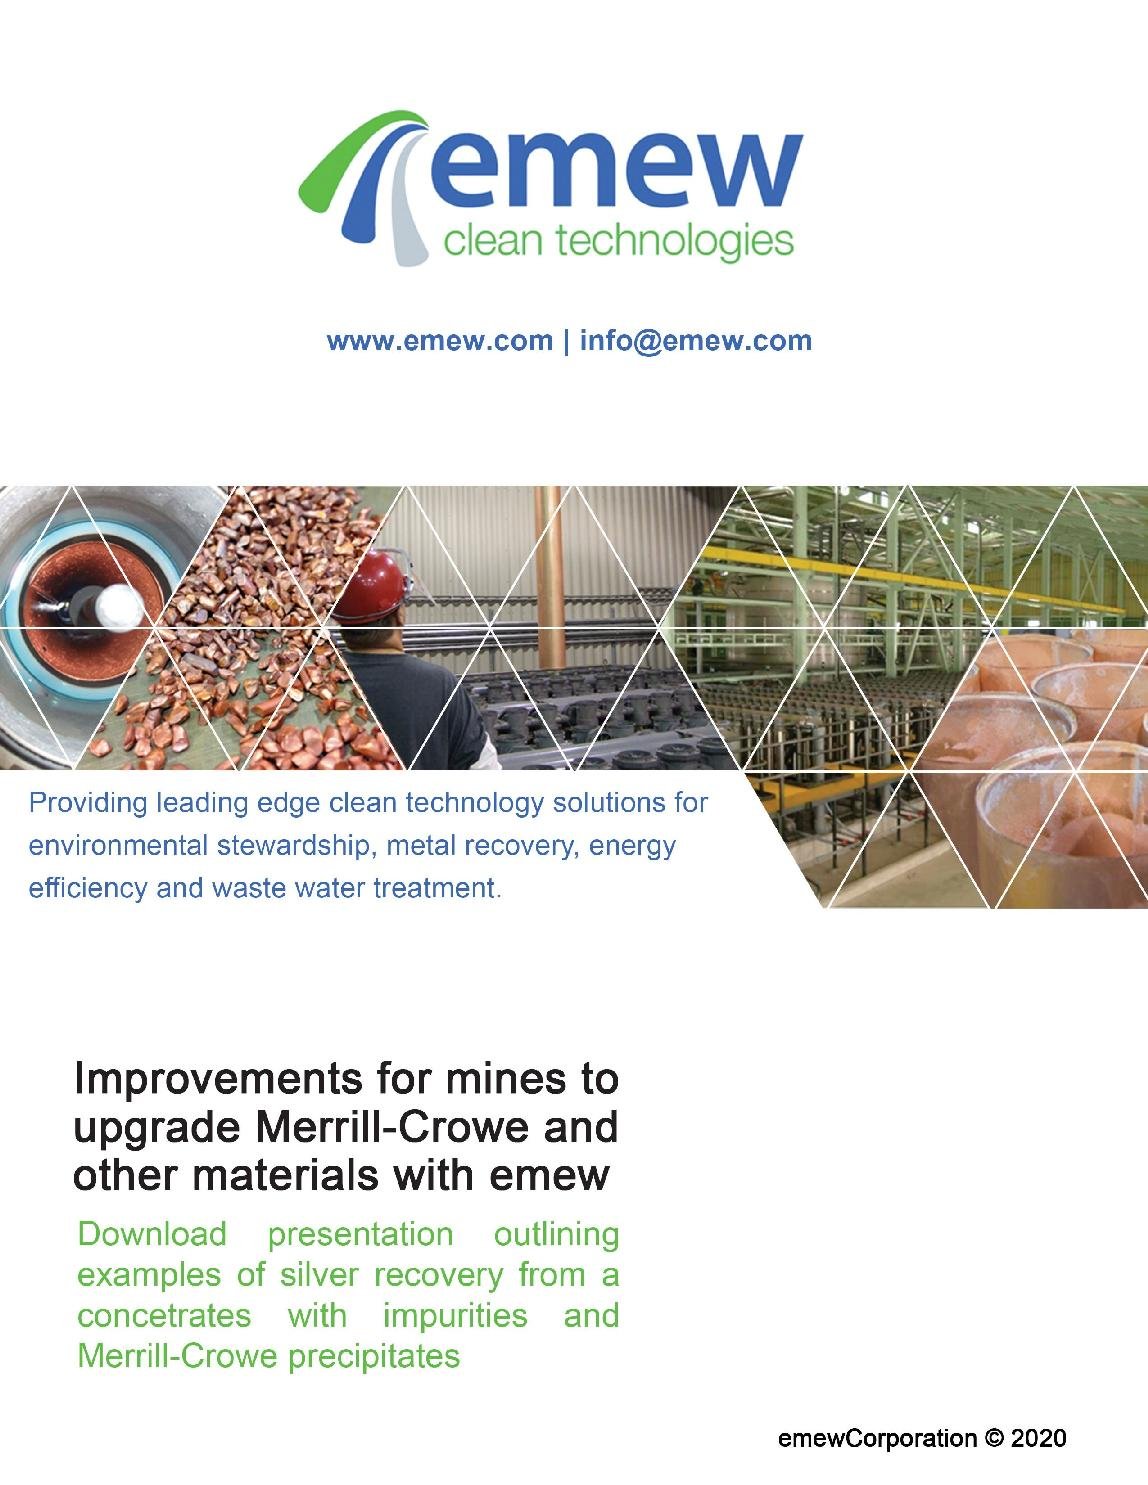 Improvements for mines to upgrade Merrill-Crowe and other materials with emew